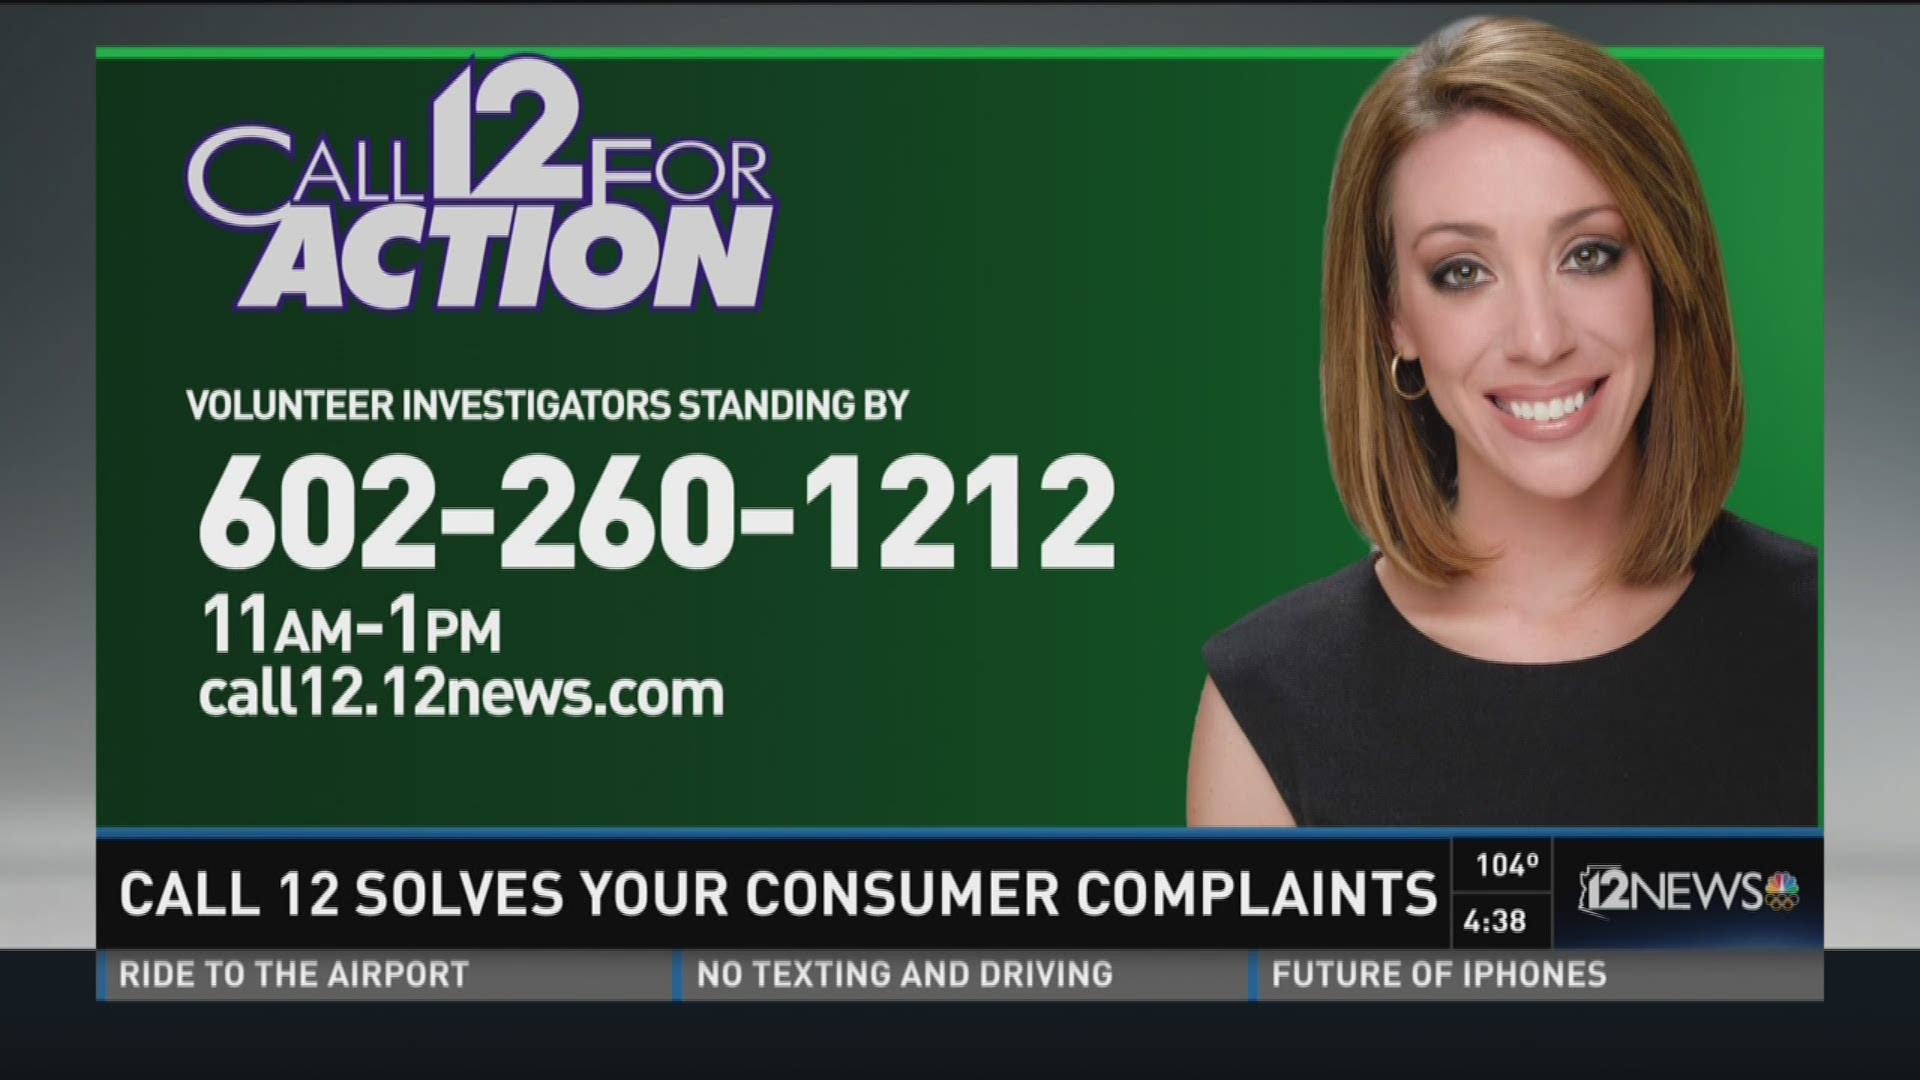 Call 12 for Action has saved Arizona consumers over $930,000 in 2016.